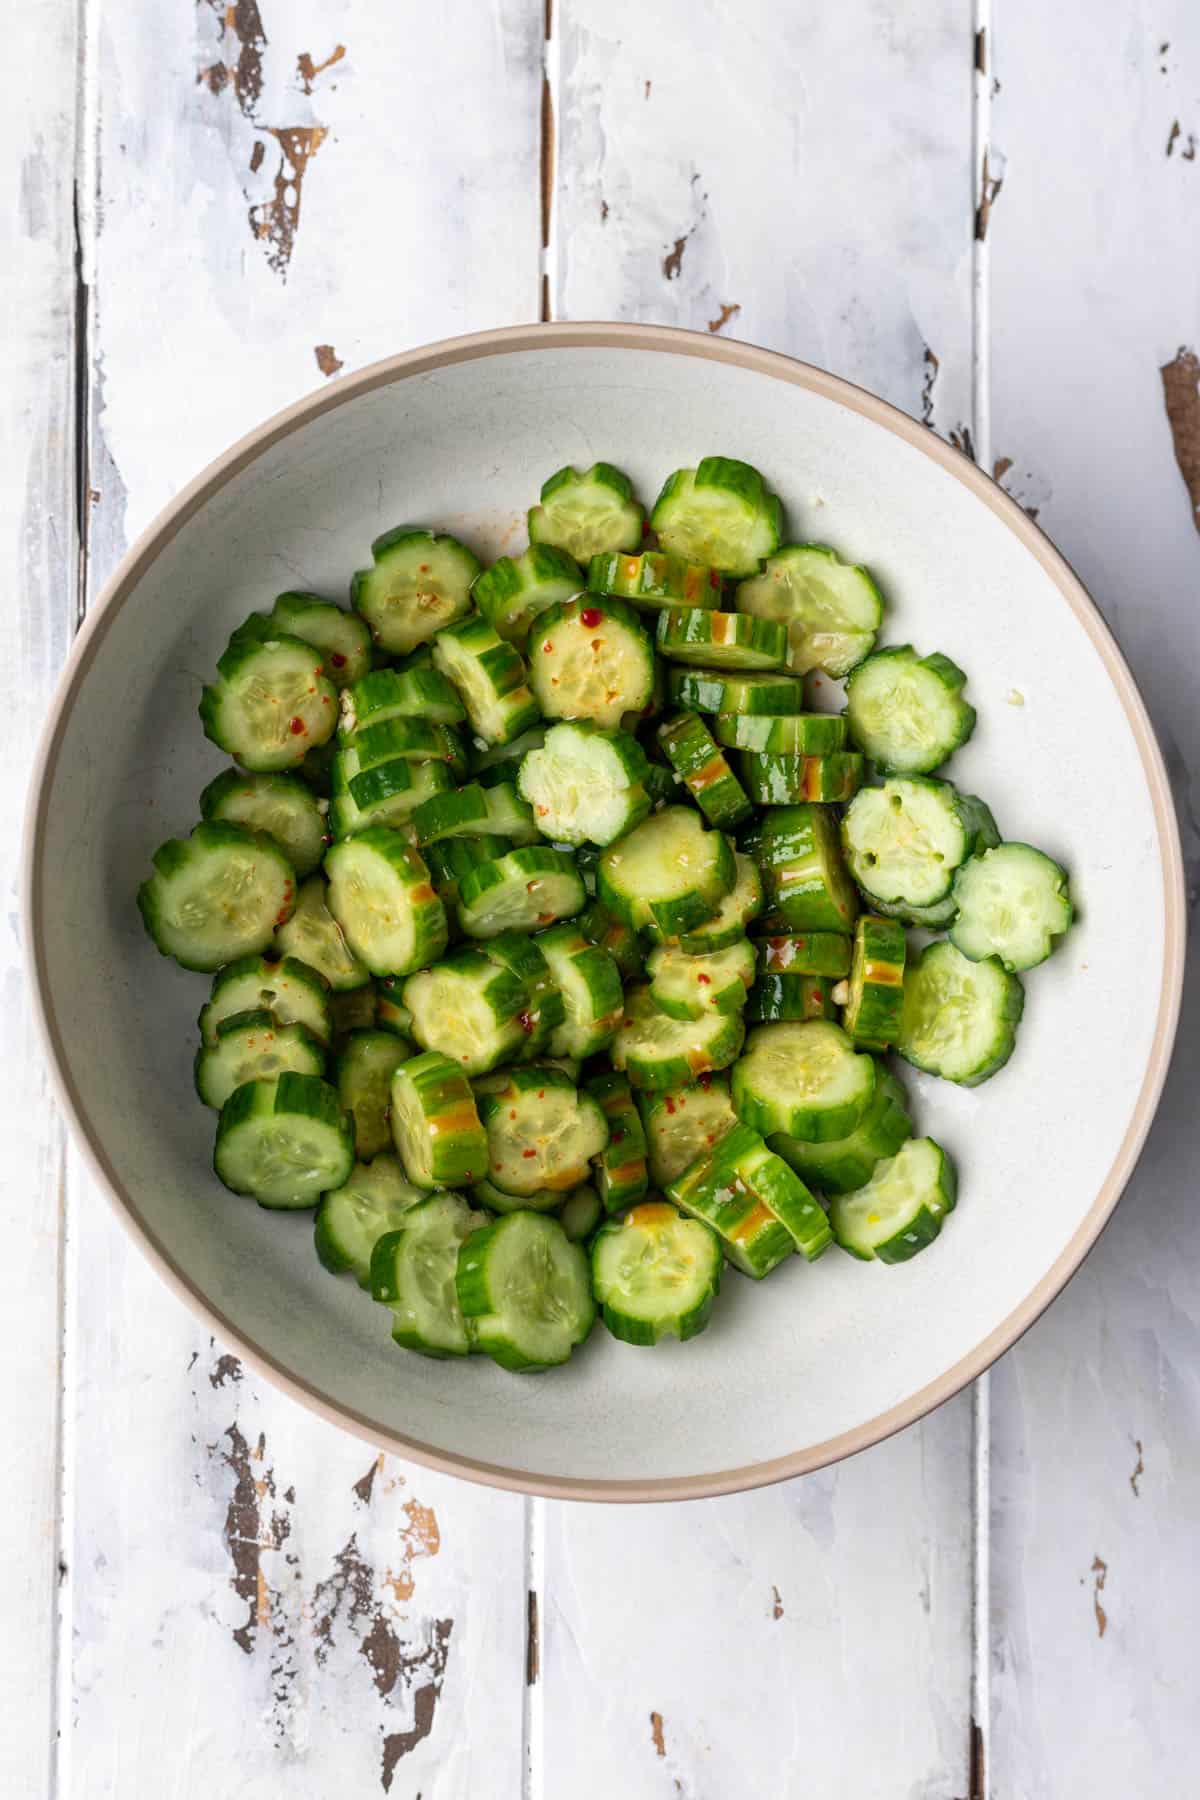 Sliced cucumbers mixed with seasonings and spicy dressing.